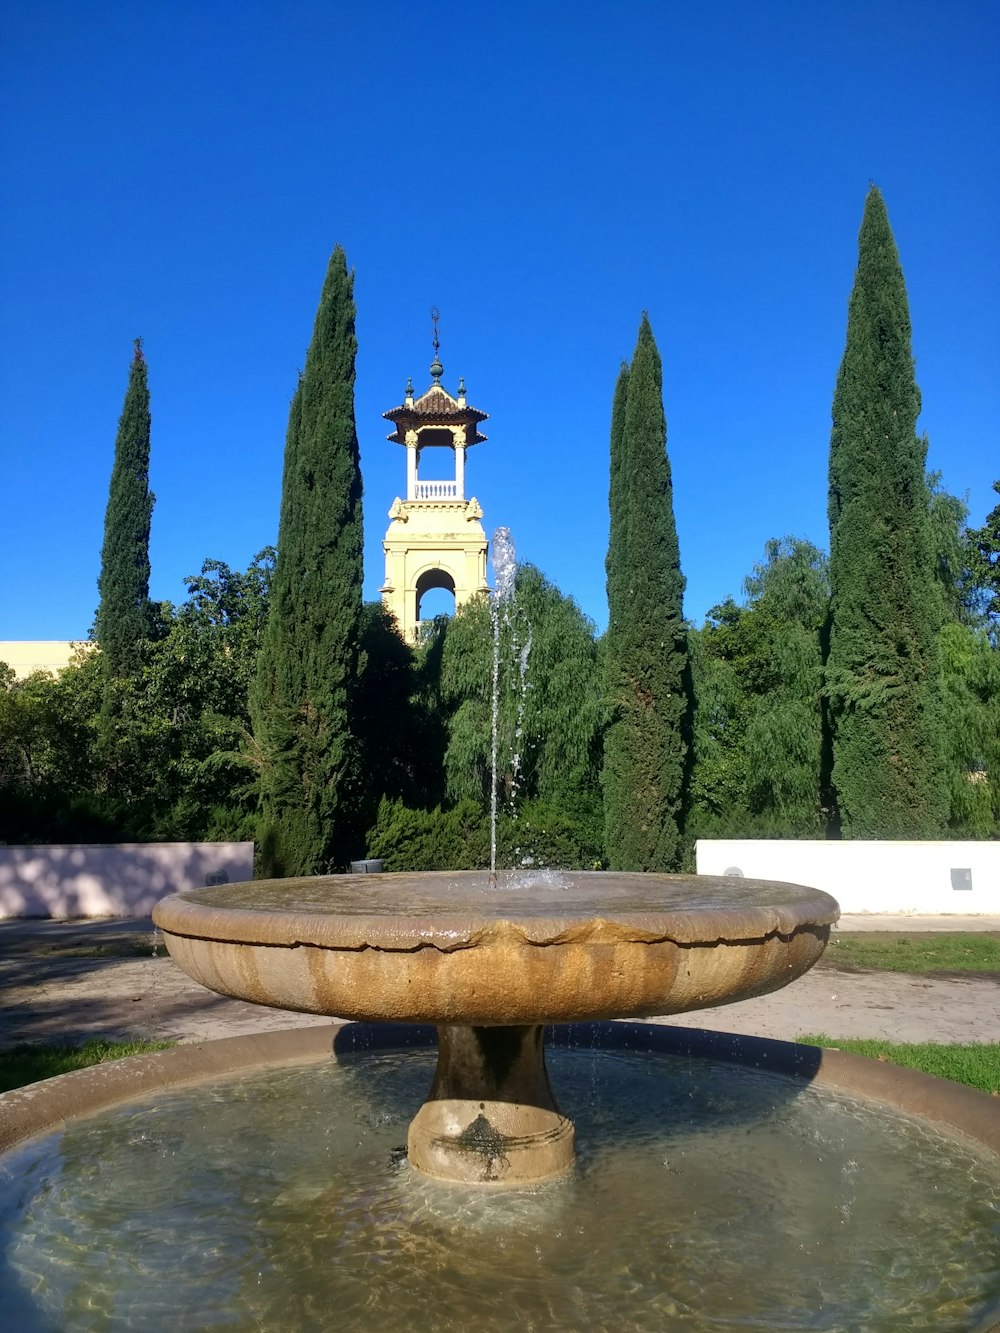 brown concrete fountain near green trees under blue sky during daytime